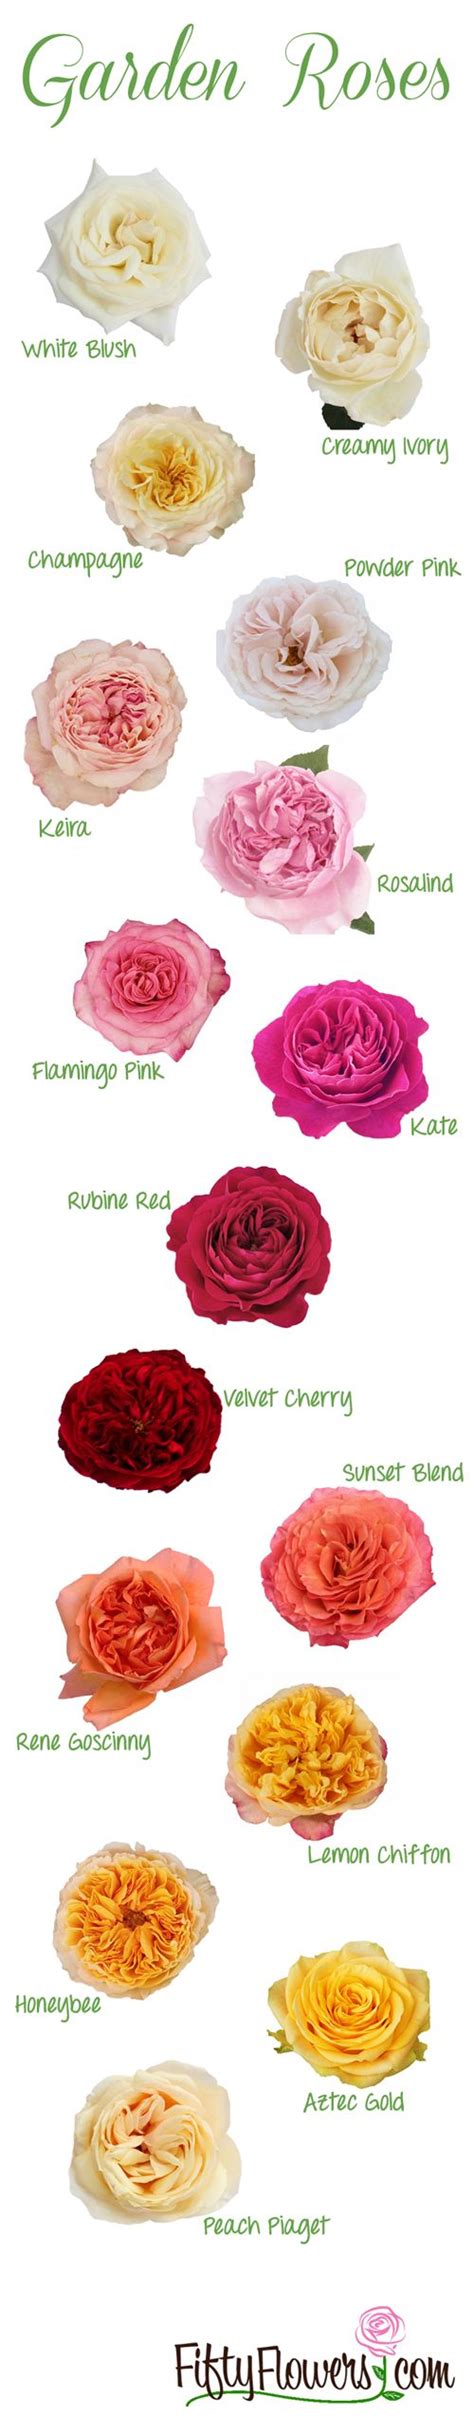 These Are Just Some Of The Gorgeous Garden Roses Available At